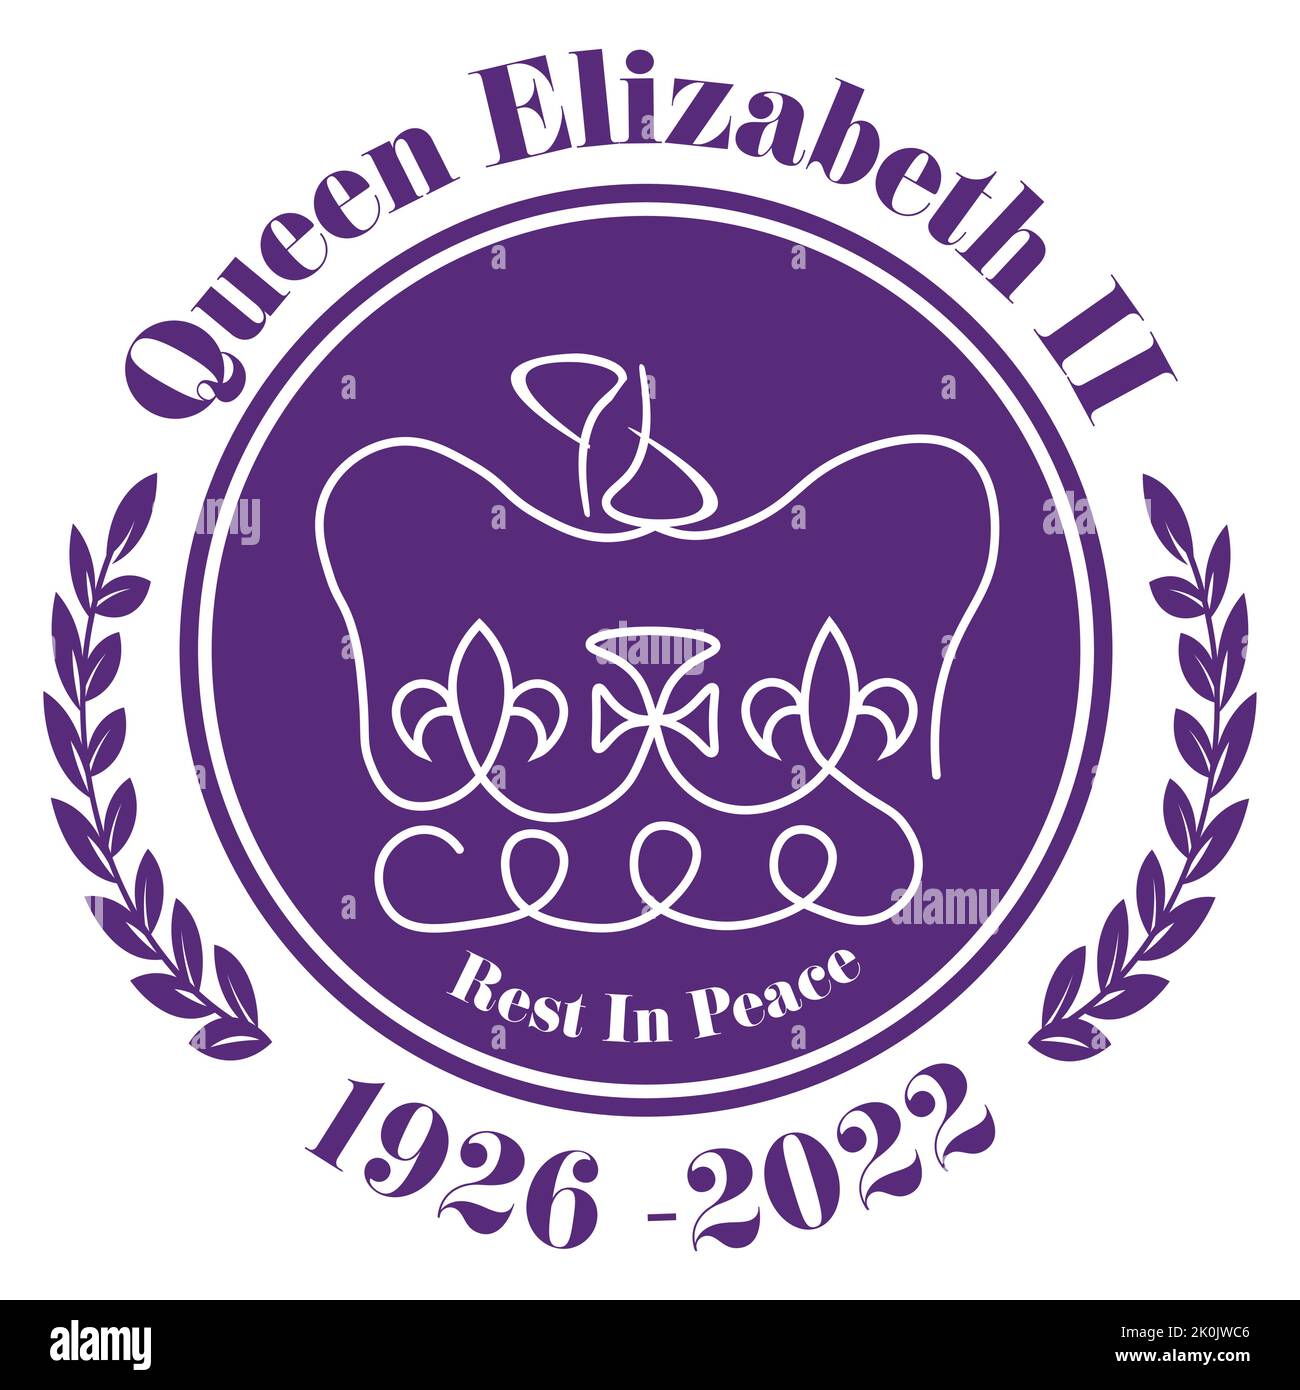 The Queens Death 2022 - Her Majesty The Queen dies aged 96 The British Monarch has served her country for 70 years. Stock Vector